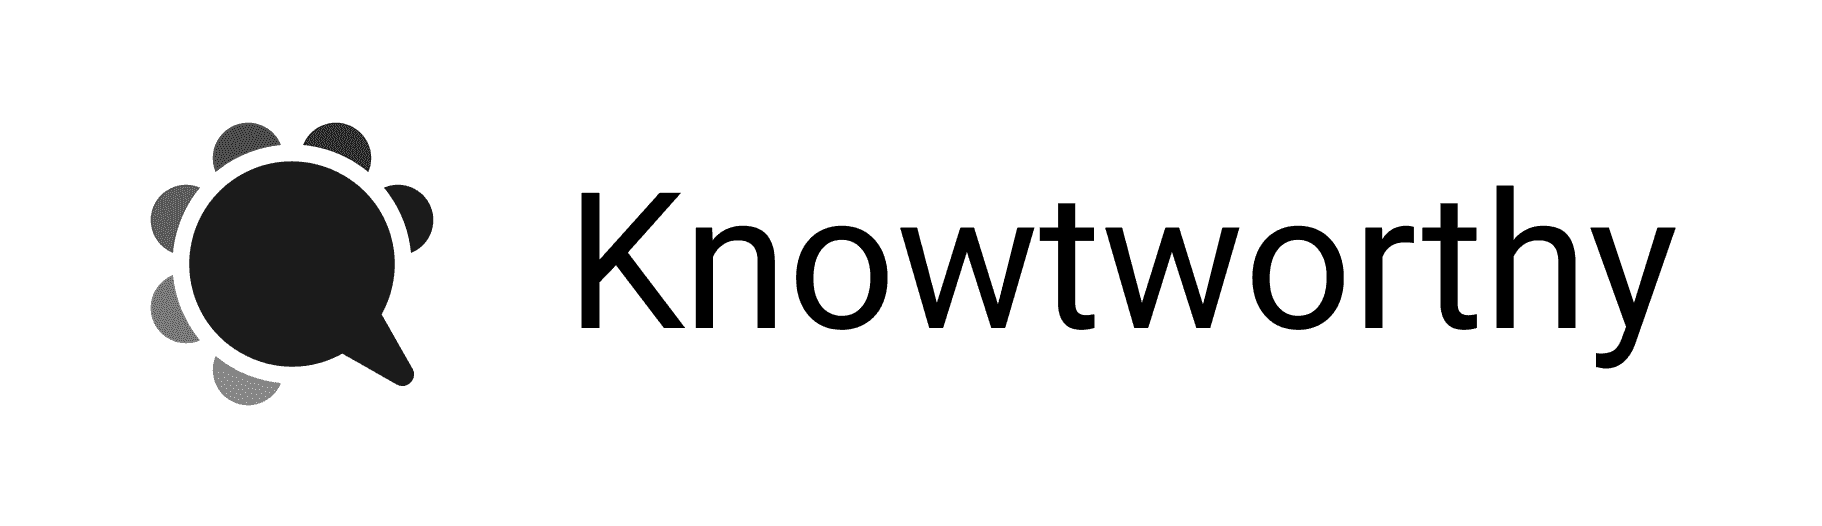 Transparent Knowtworthy Logo with Company Name